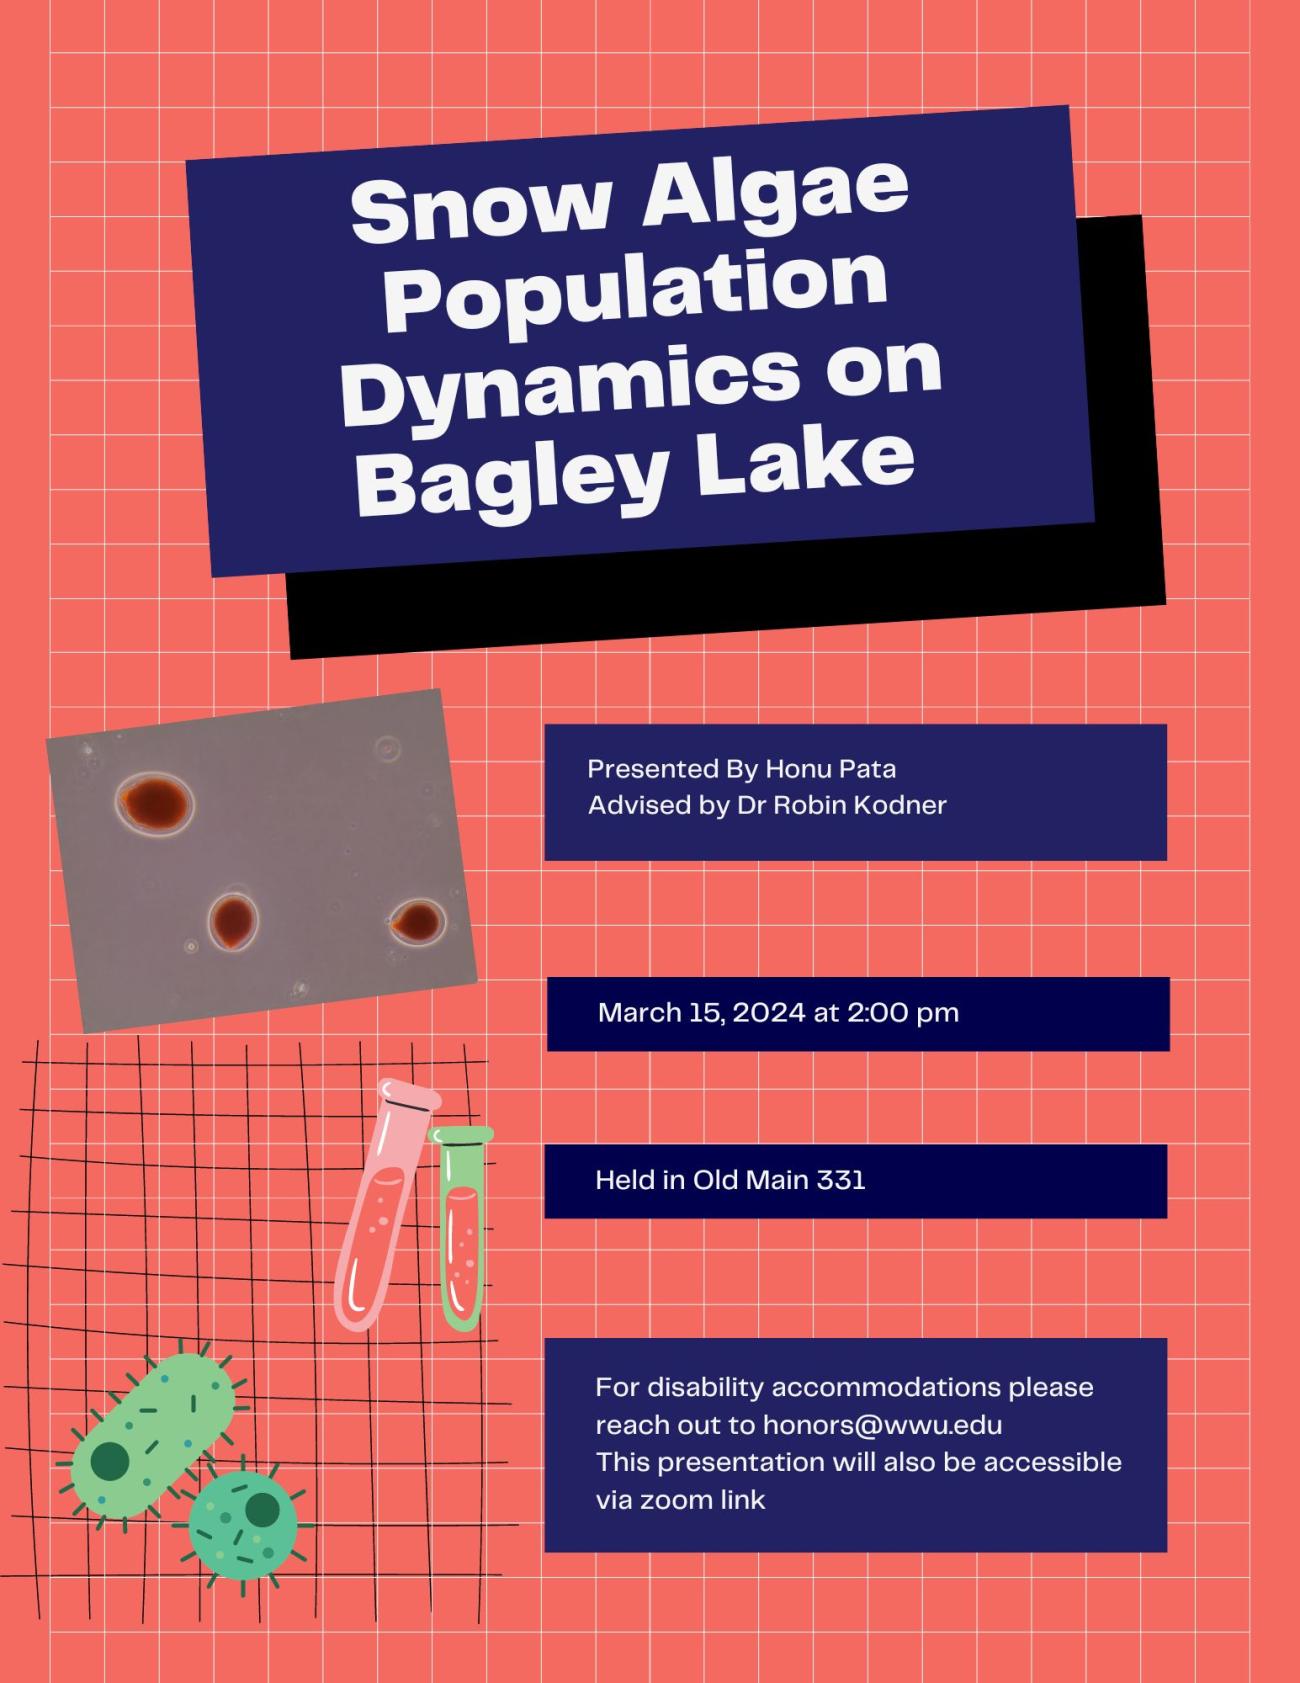 Pink background with dark blue boxes. In the first dark blue box, white text reads "Snow Algae Population Dynamics on Bagley Lake". The boxes below it say "Presented by Honu Pata. Advised by Dr Robin Kodner. March 15, 2024 at 2:00 pm. Held in Old Main 331. For disability accommodations please reach out to honors@wwu.edu. This presentation will also be accessible via zoom link." To the left are a microscope image of 3 small red cells & below it is a graphic of 2 test tubes & a graphic of 2 green cells.